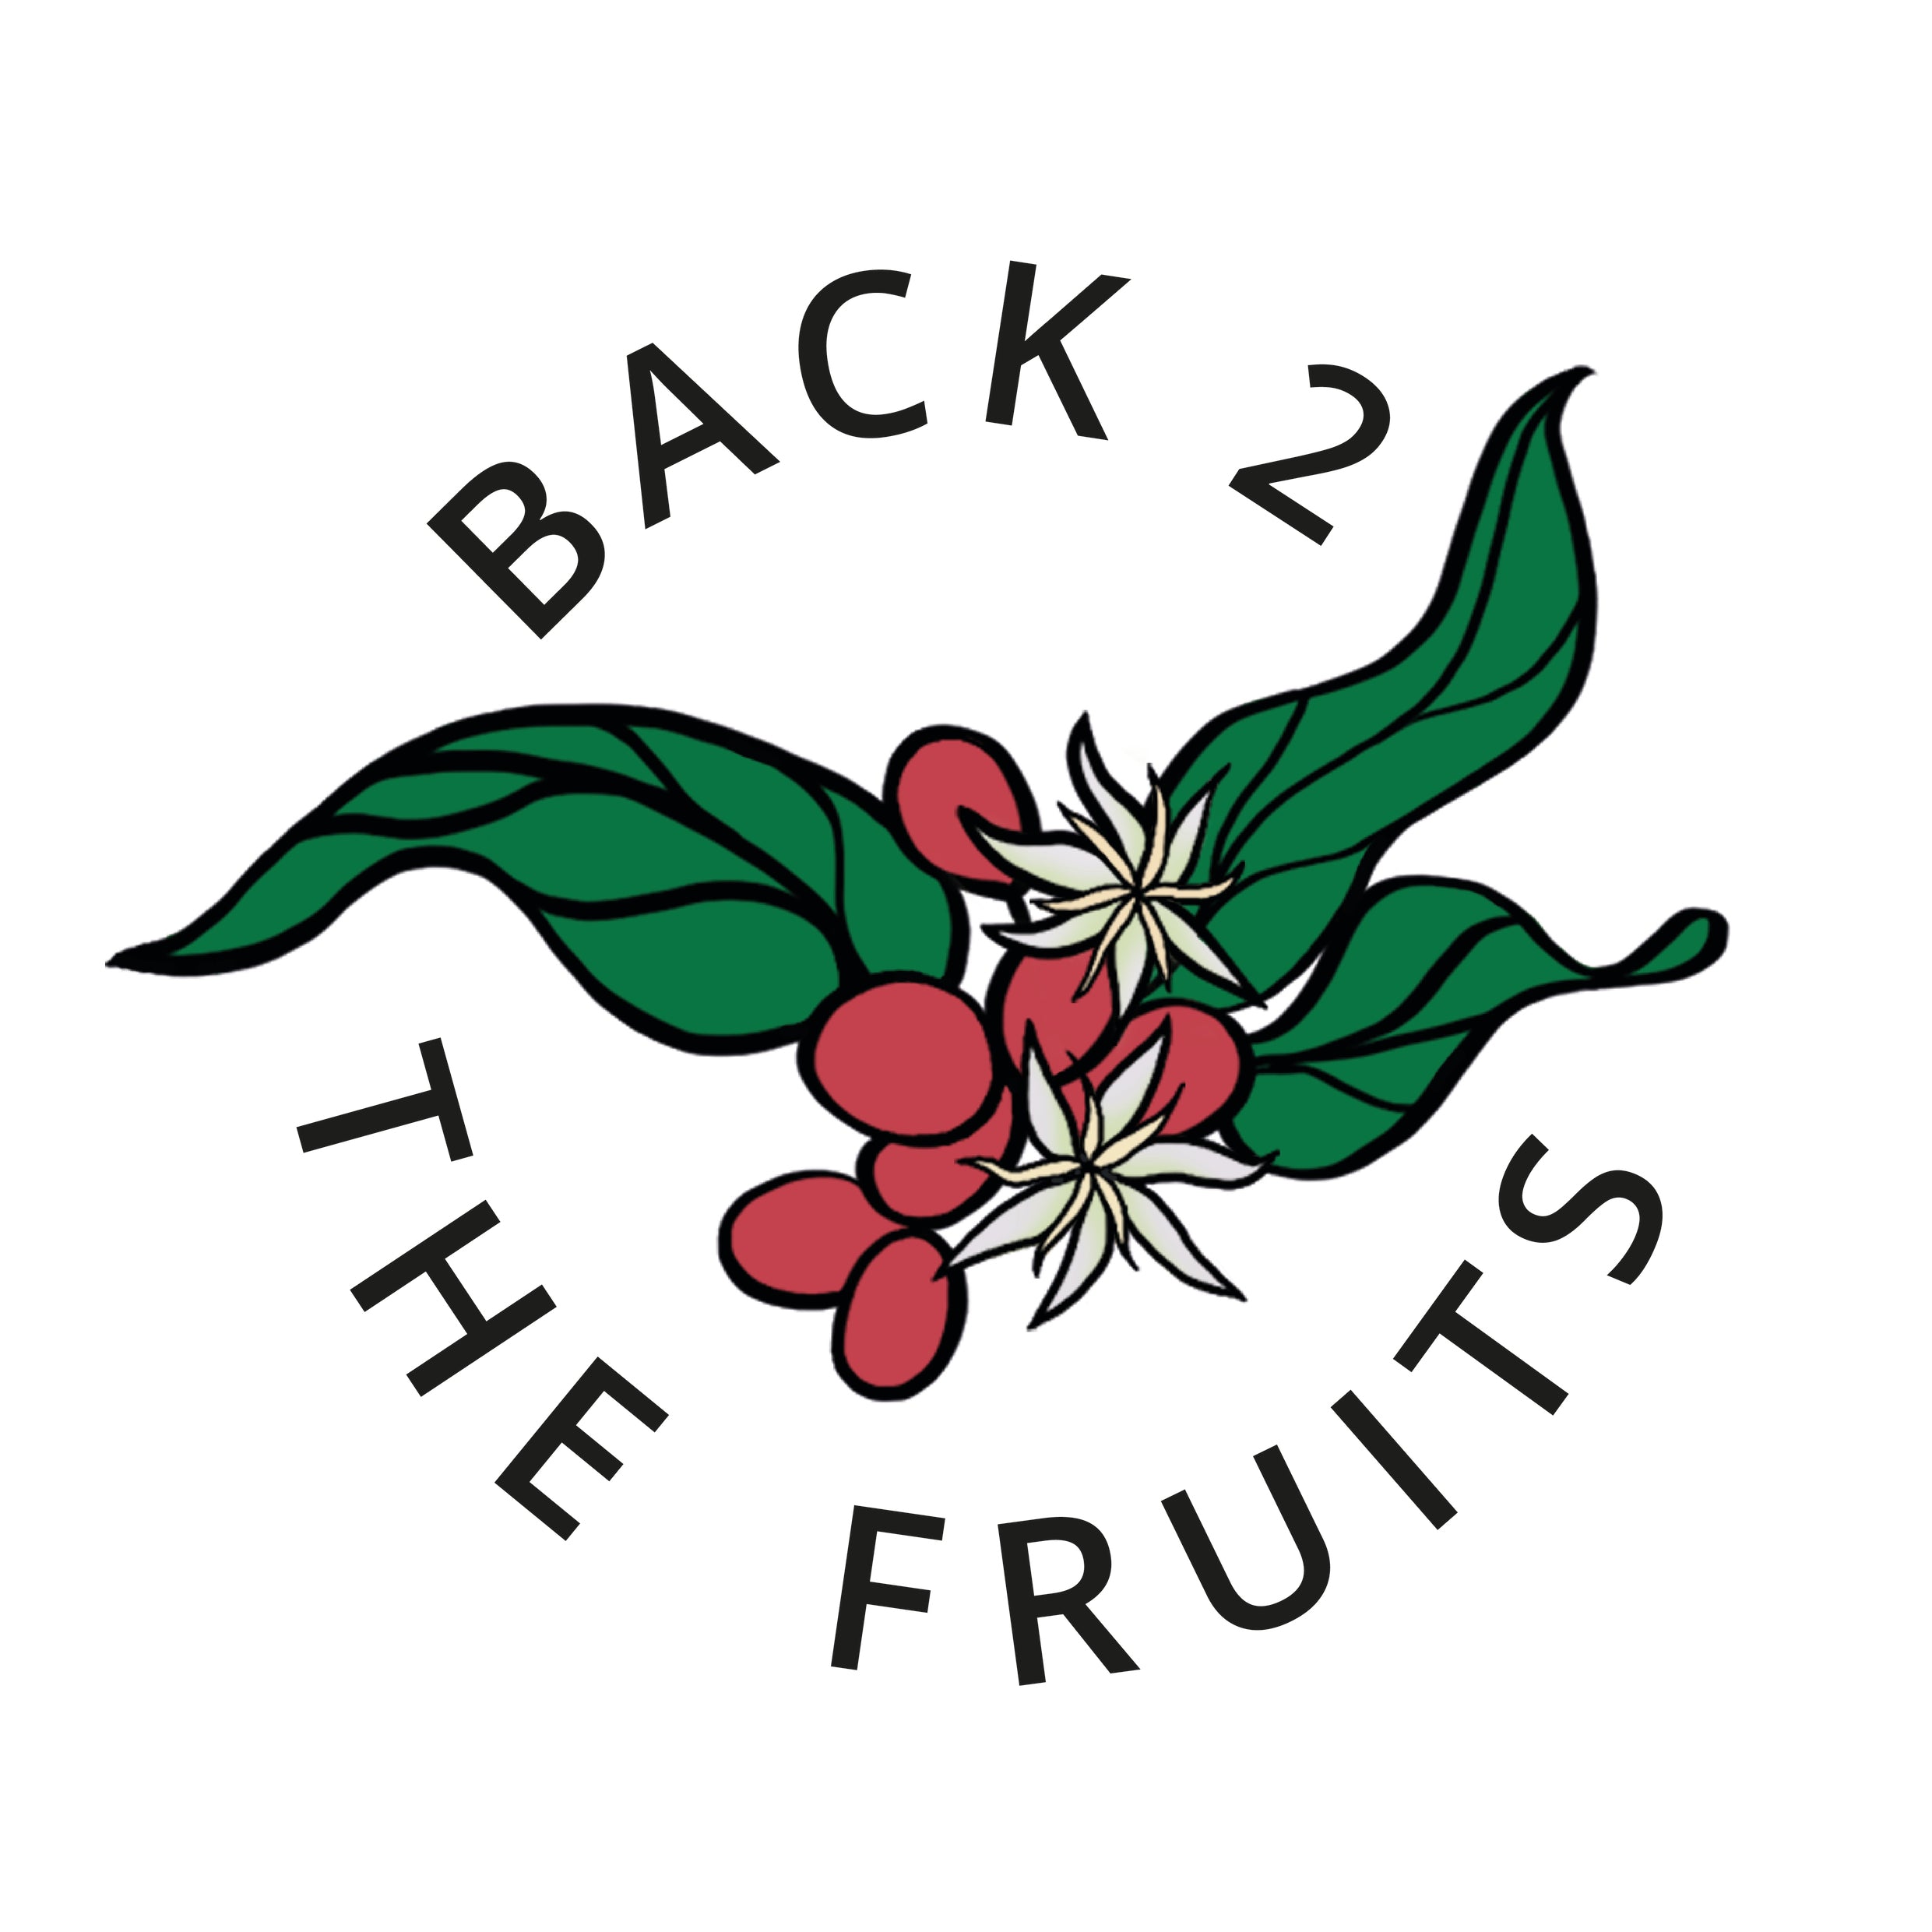 Back 2 the Fruits